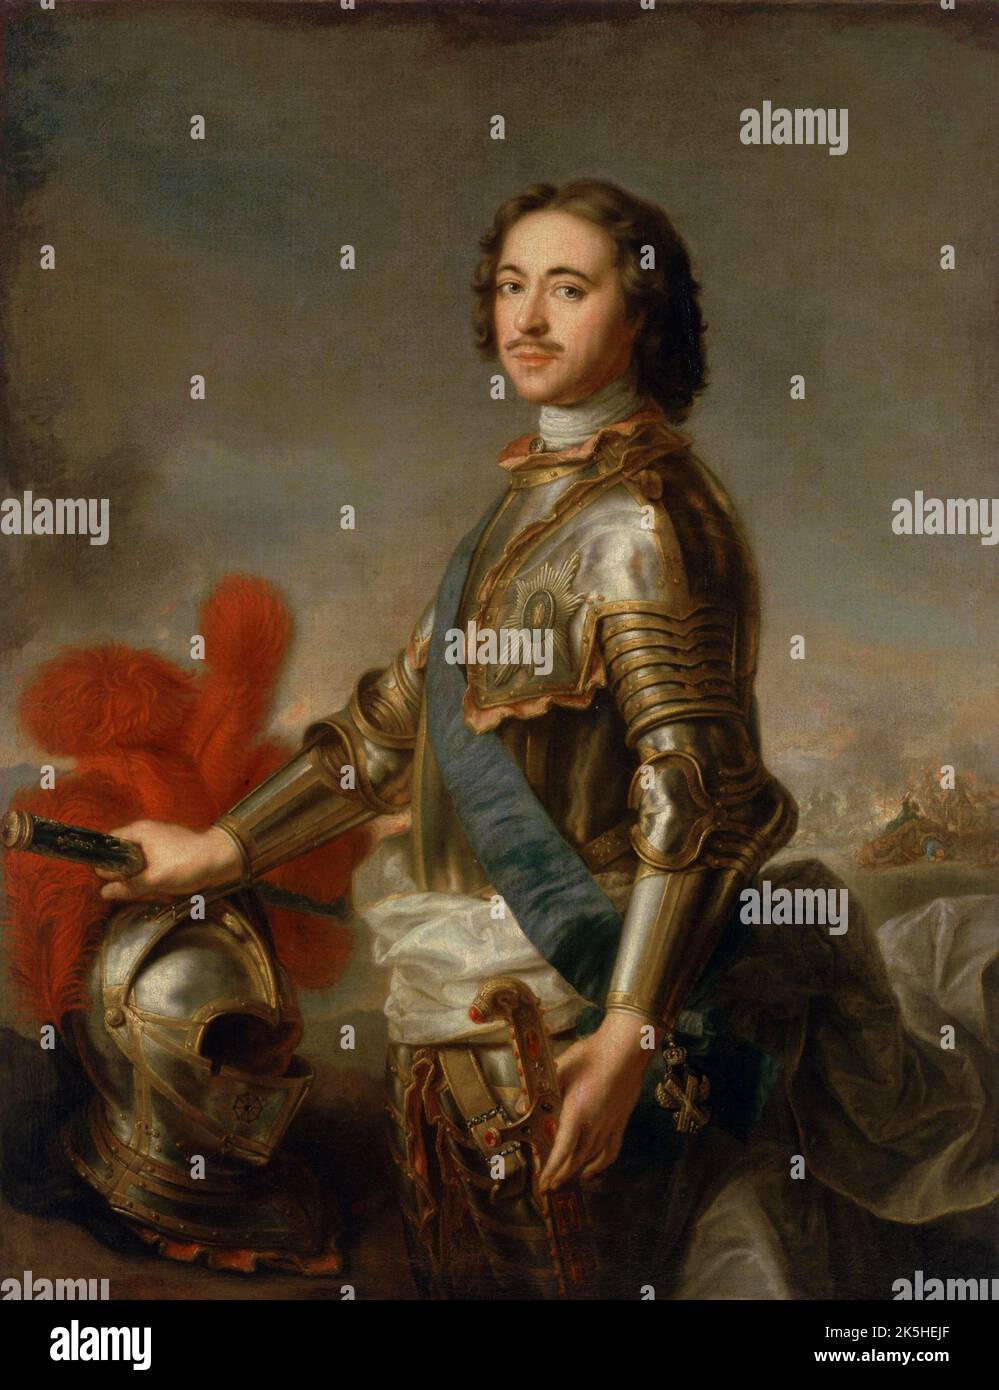 Peter I (1672 – 1725), known as Peter the Great, monarch of Russia who modernised it and made it a European power. He ruled the Tsardom of Russia from 1682 to 1721 and subsequently the Russian Empire until his death in 1725.Painting by Jean-Marc Nattier. Stock Photo